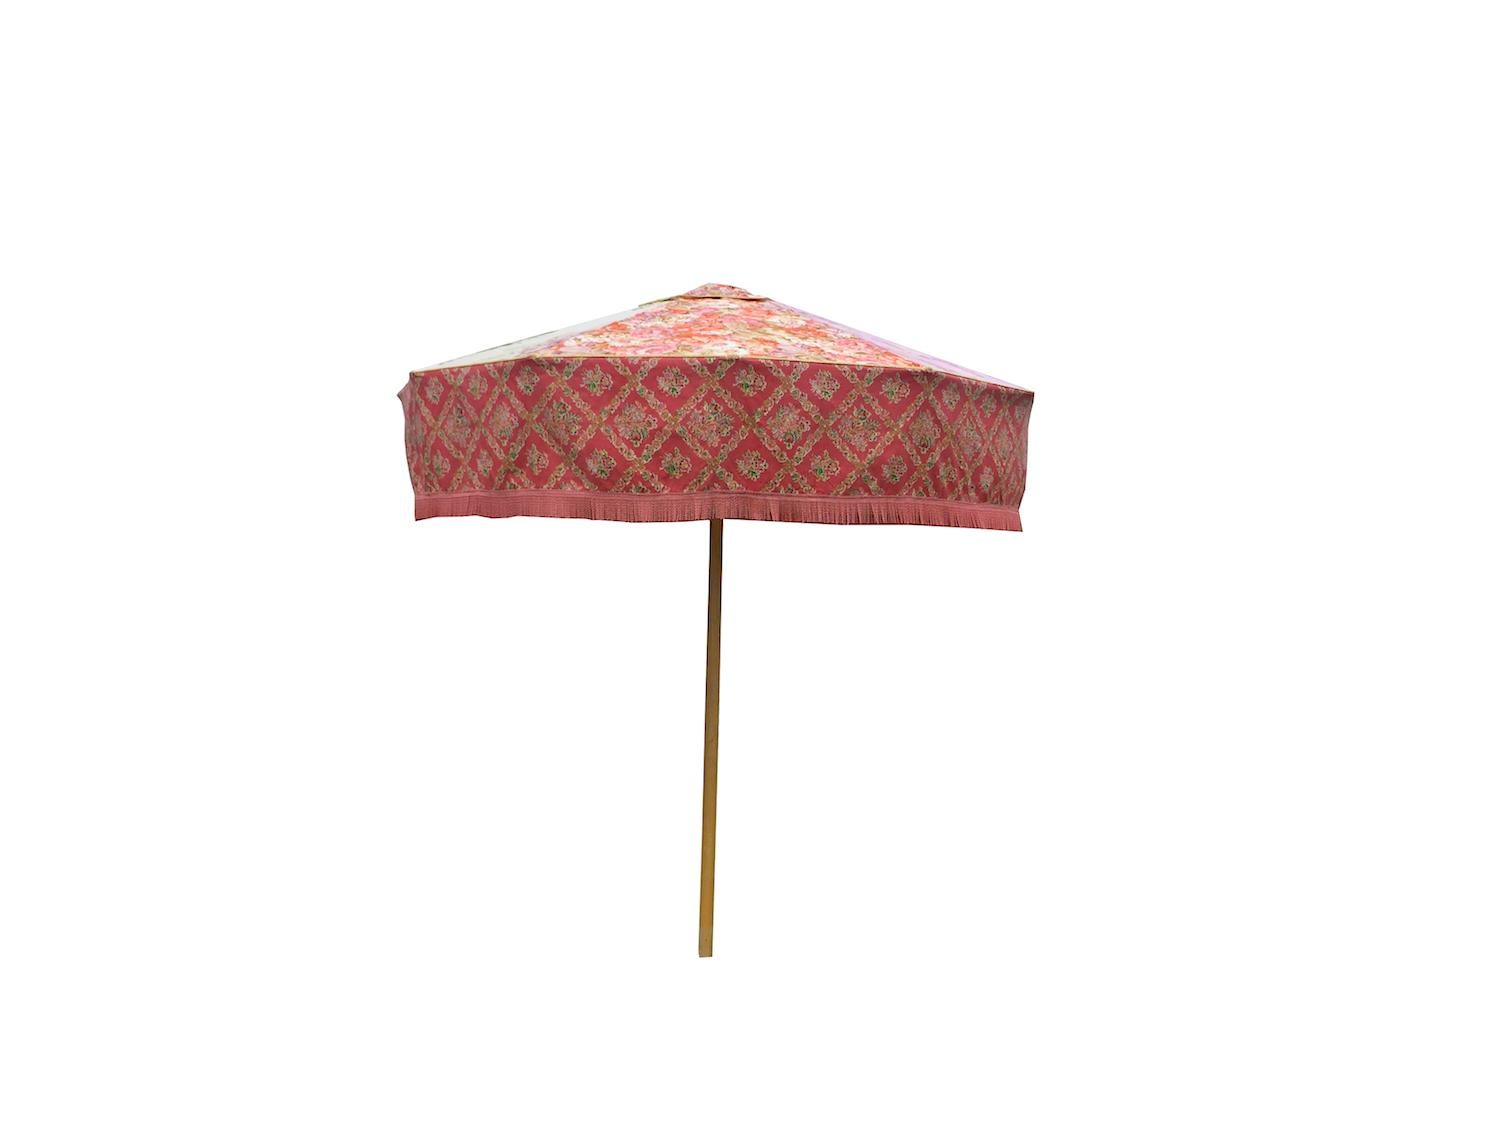 You are viewing one of Sunbeam Jackie's iconic sun umbrellas. 

This patio umbrella is made using a unique combination of vintage fabrics from legendary British textile houses including Designers Guild and Sanderson.

Sunbeam Jackie's iconic